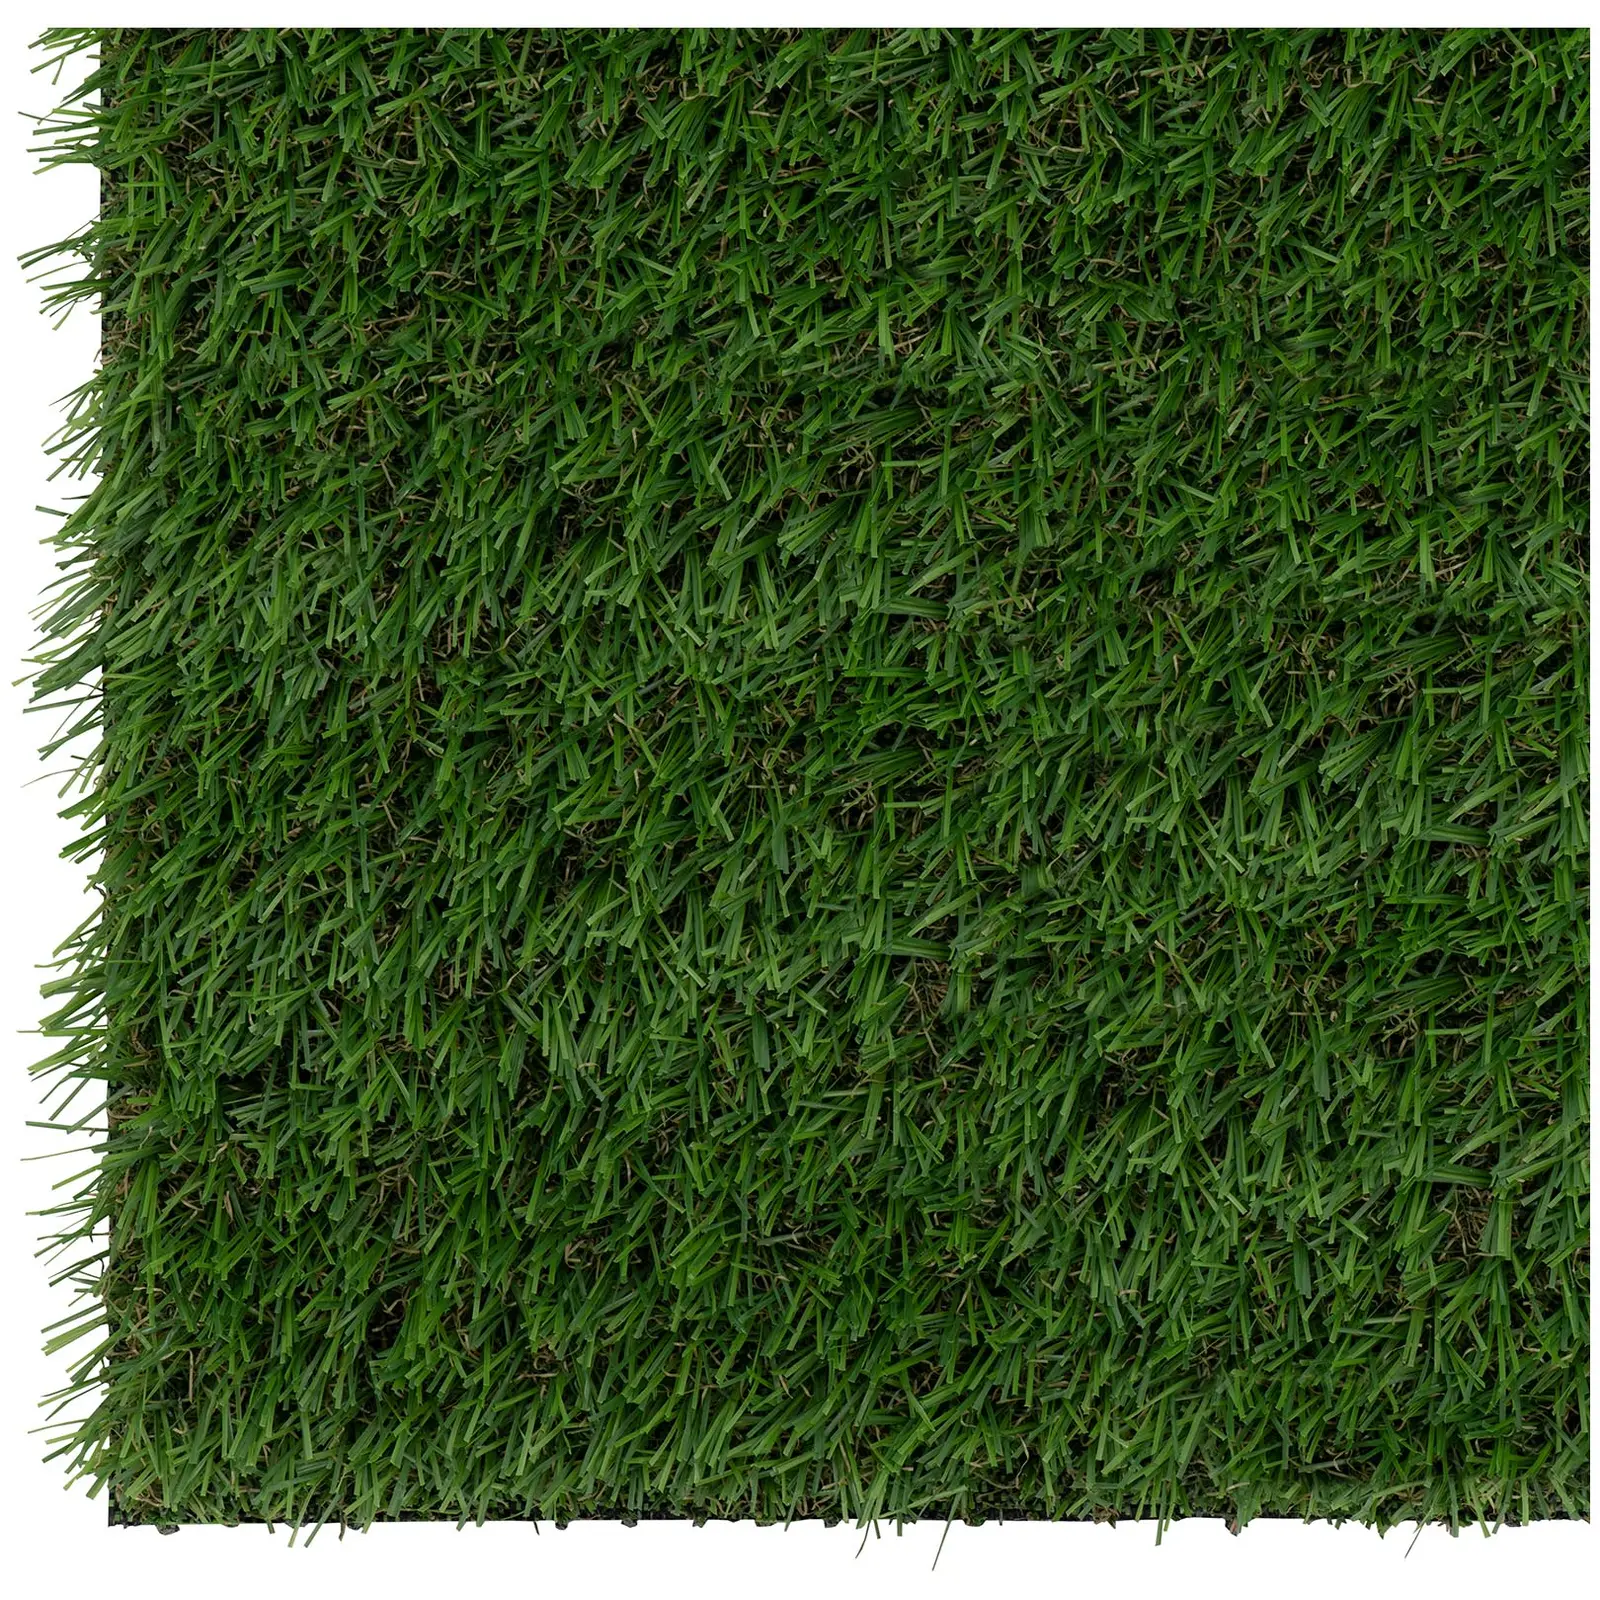 Artificial grass - 100 x 100 cm - Height: 20 mm - Stitch rate: 13/10 cm - UV-resistant